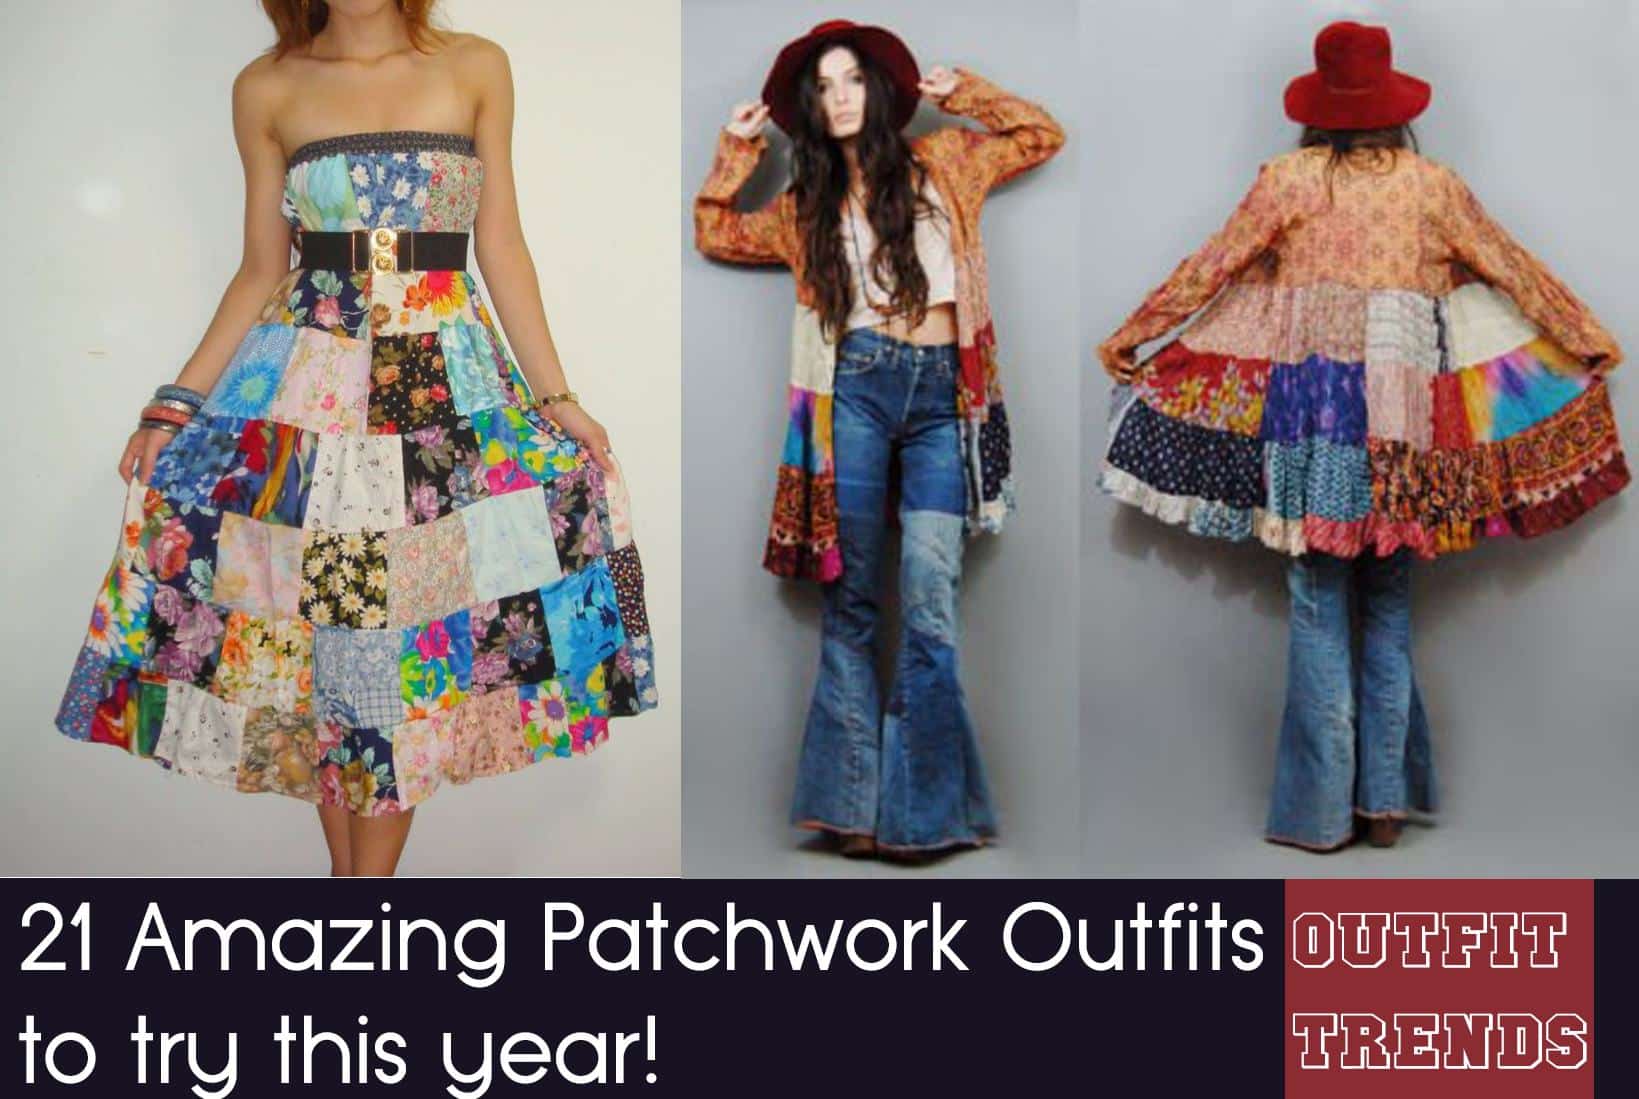 Patchwork Outfits-21 Ways to Wear Patchwork Outfits this Year